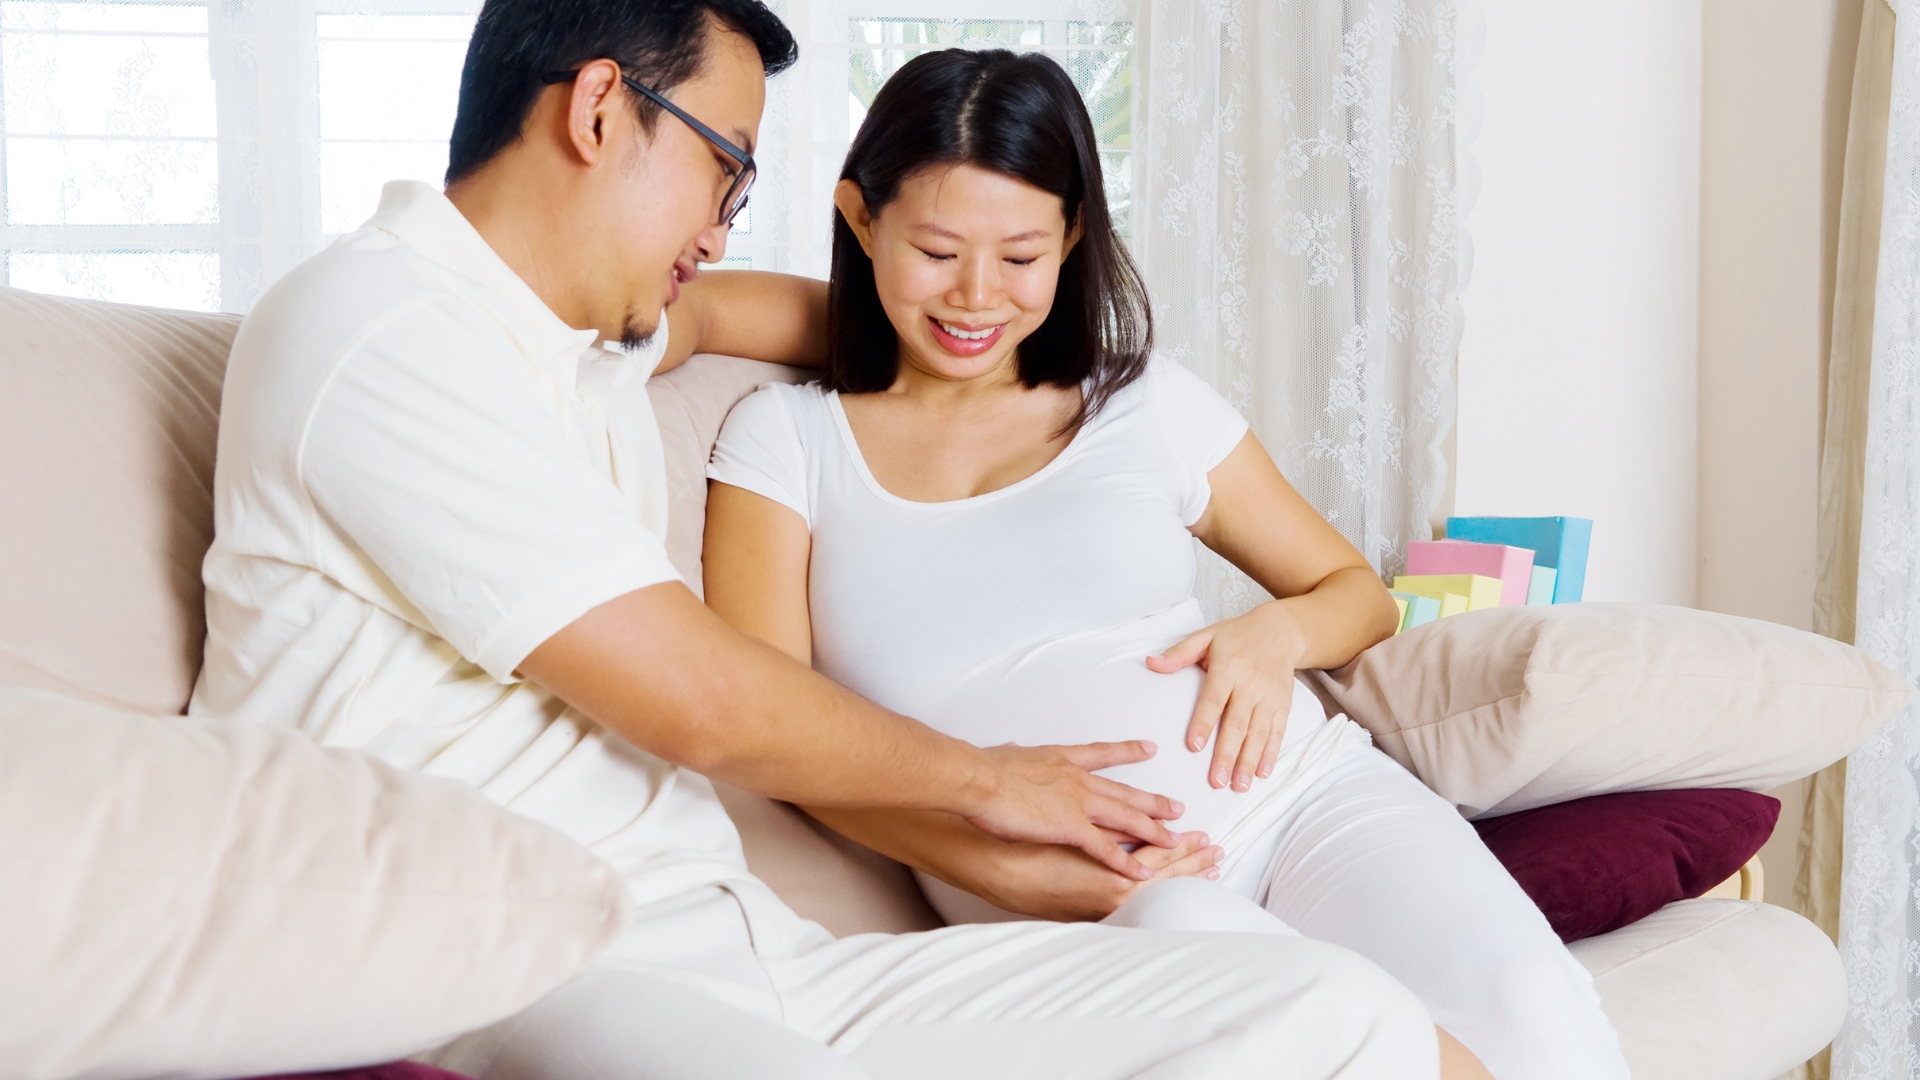 Can Partners Join Pregnancy Yoga Sessions?